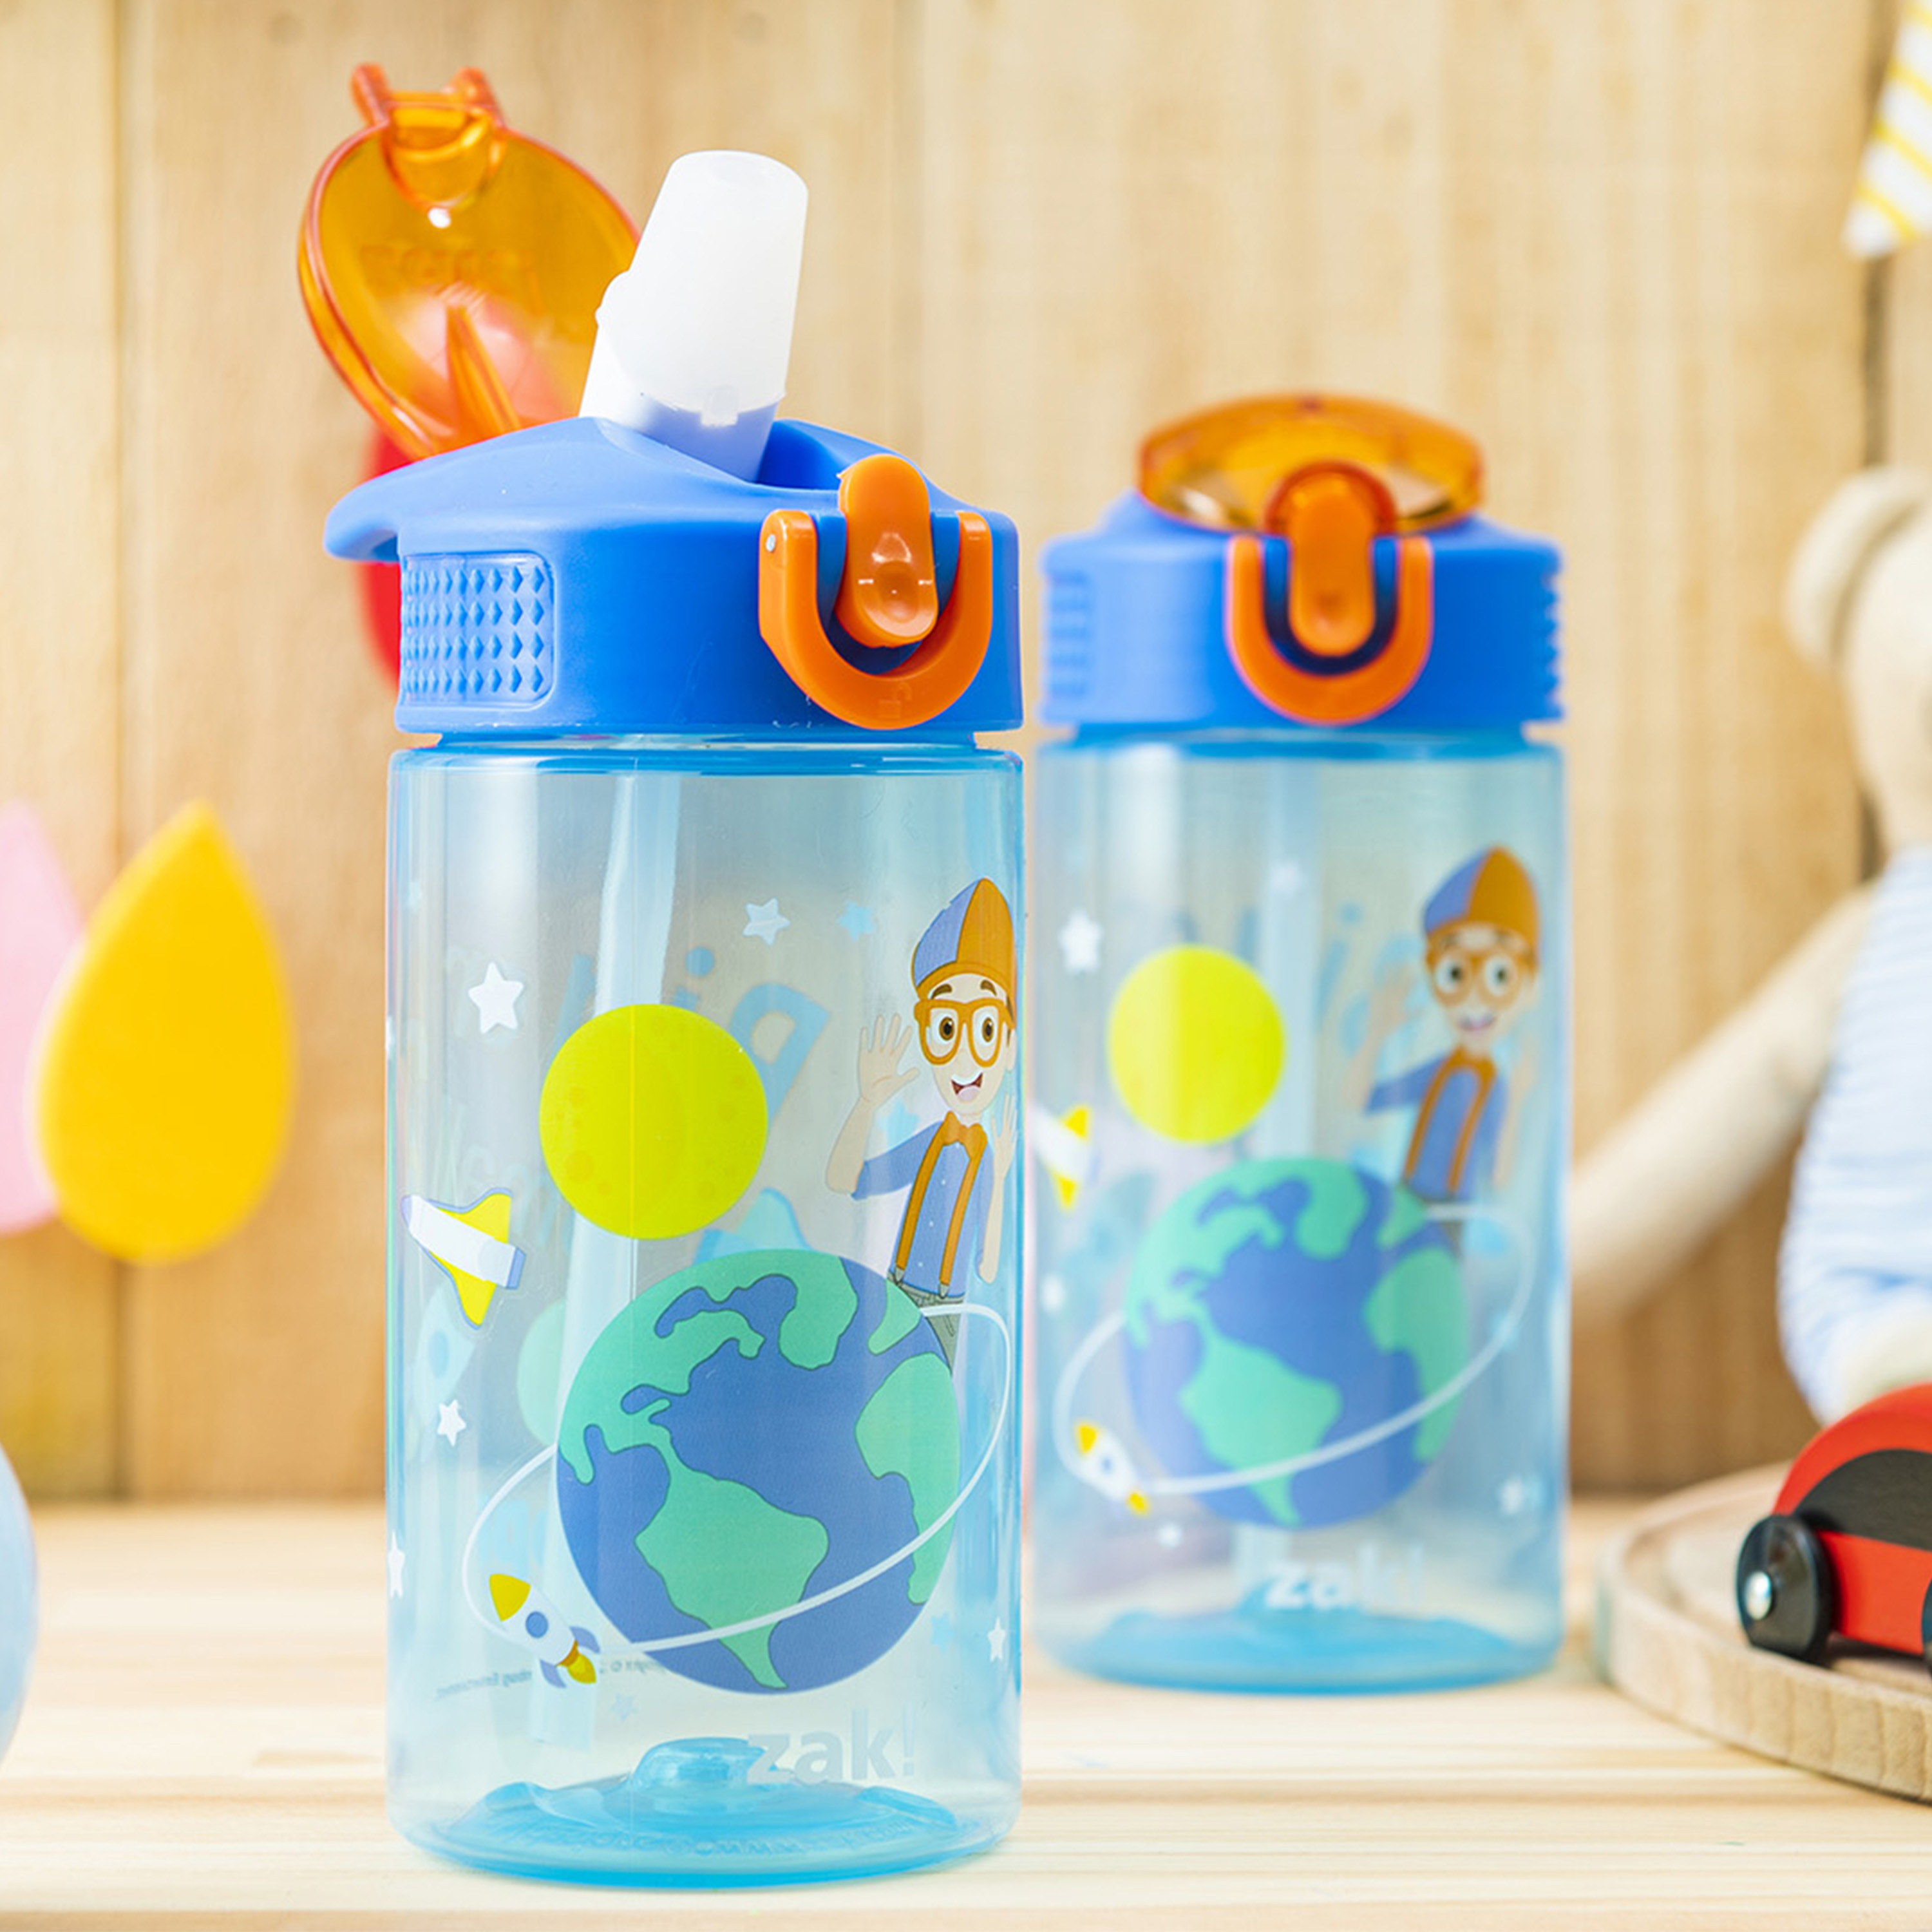 Blippi 16 ounce Reusable Plastic Water Bottle with Straw, Big or Small?, 2-piece set slideshow image 5